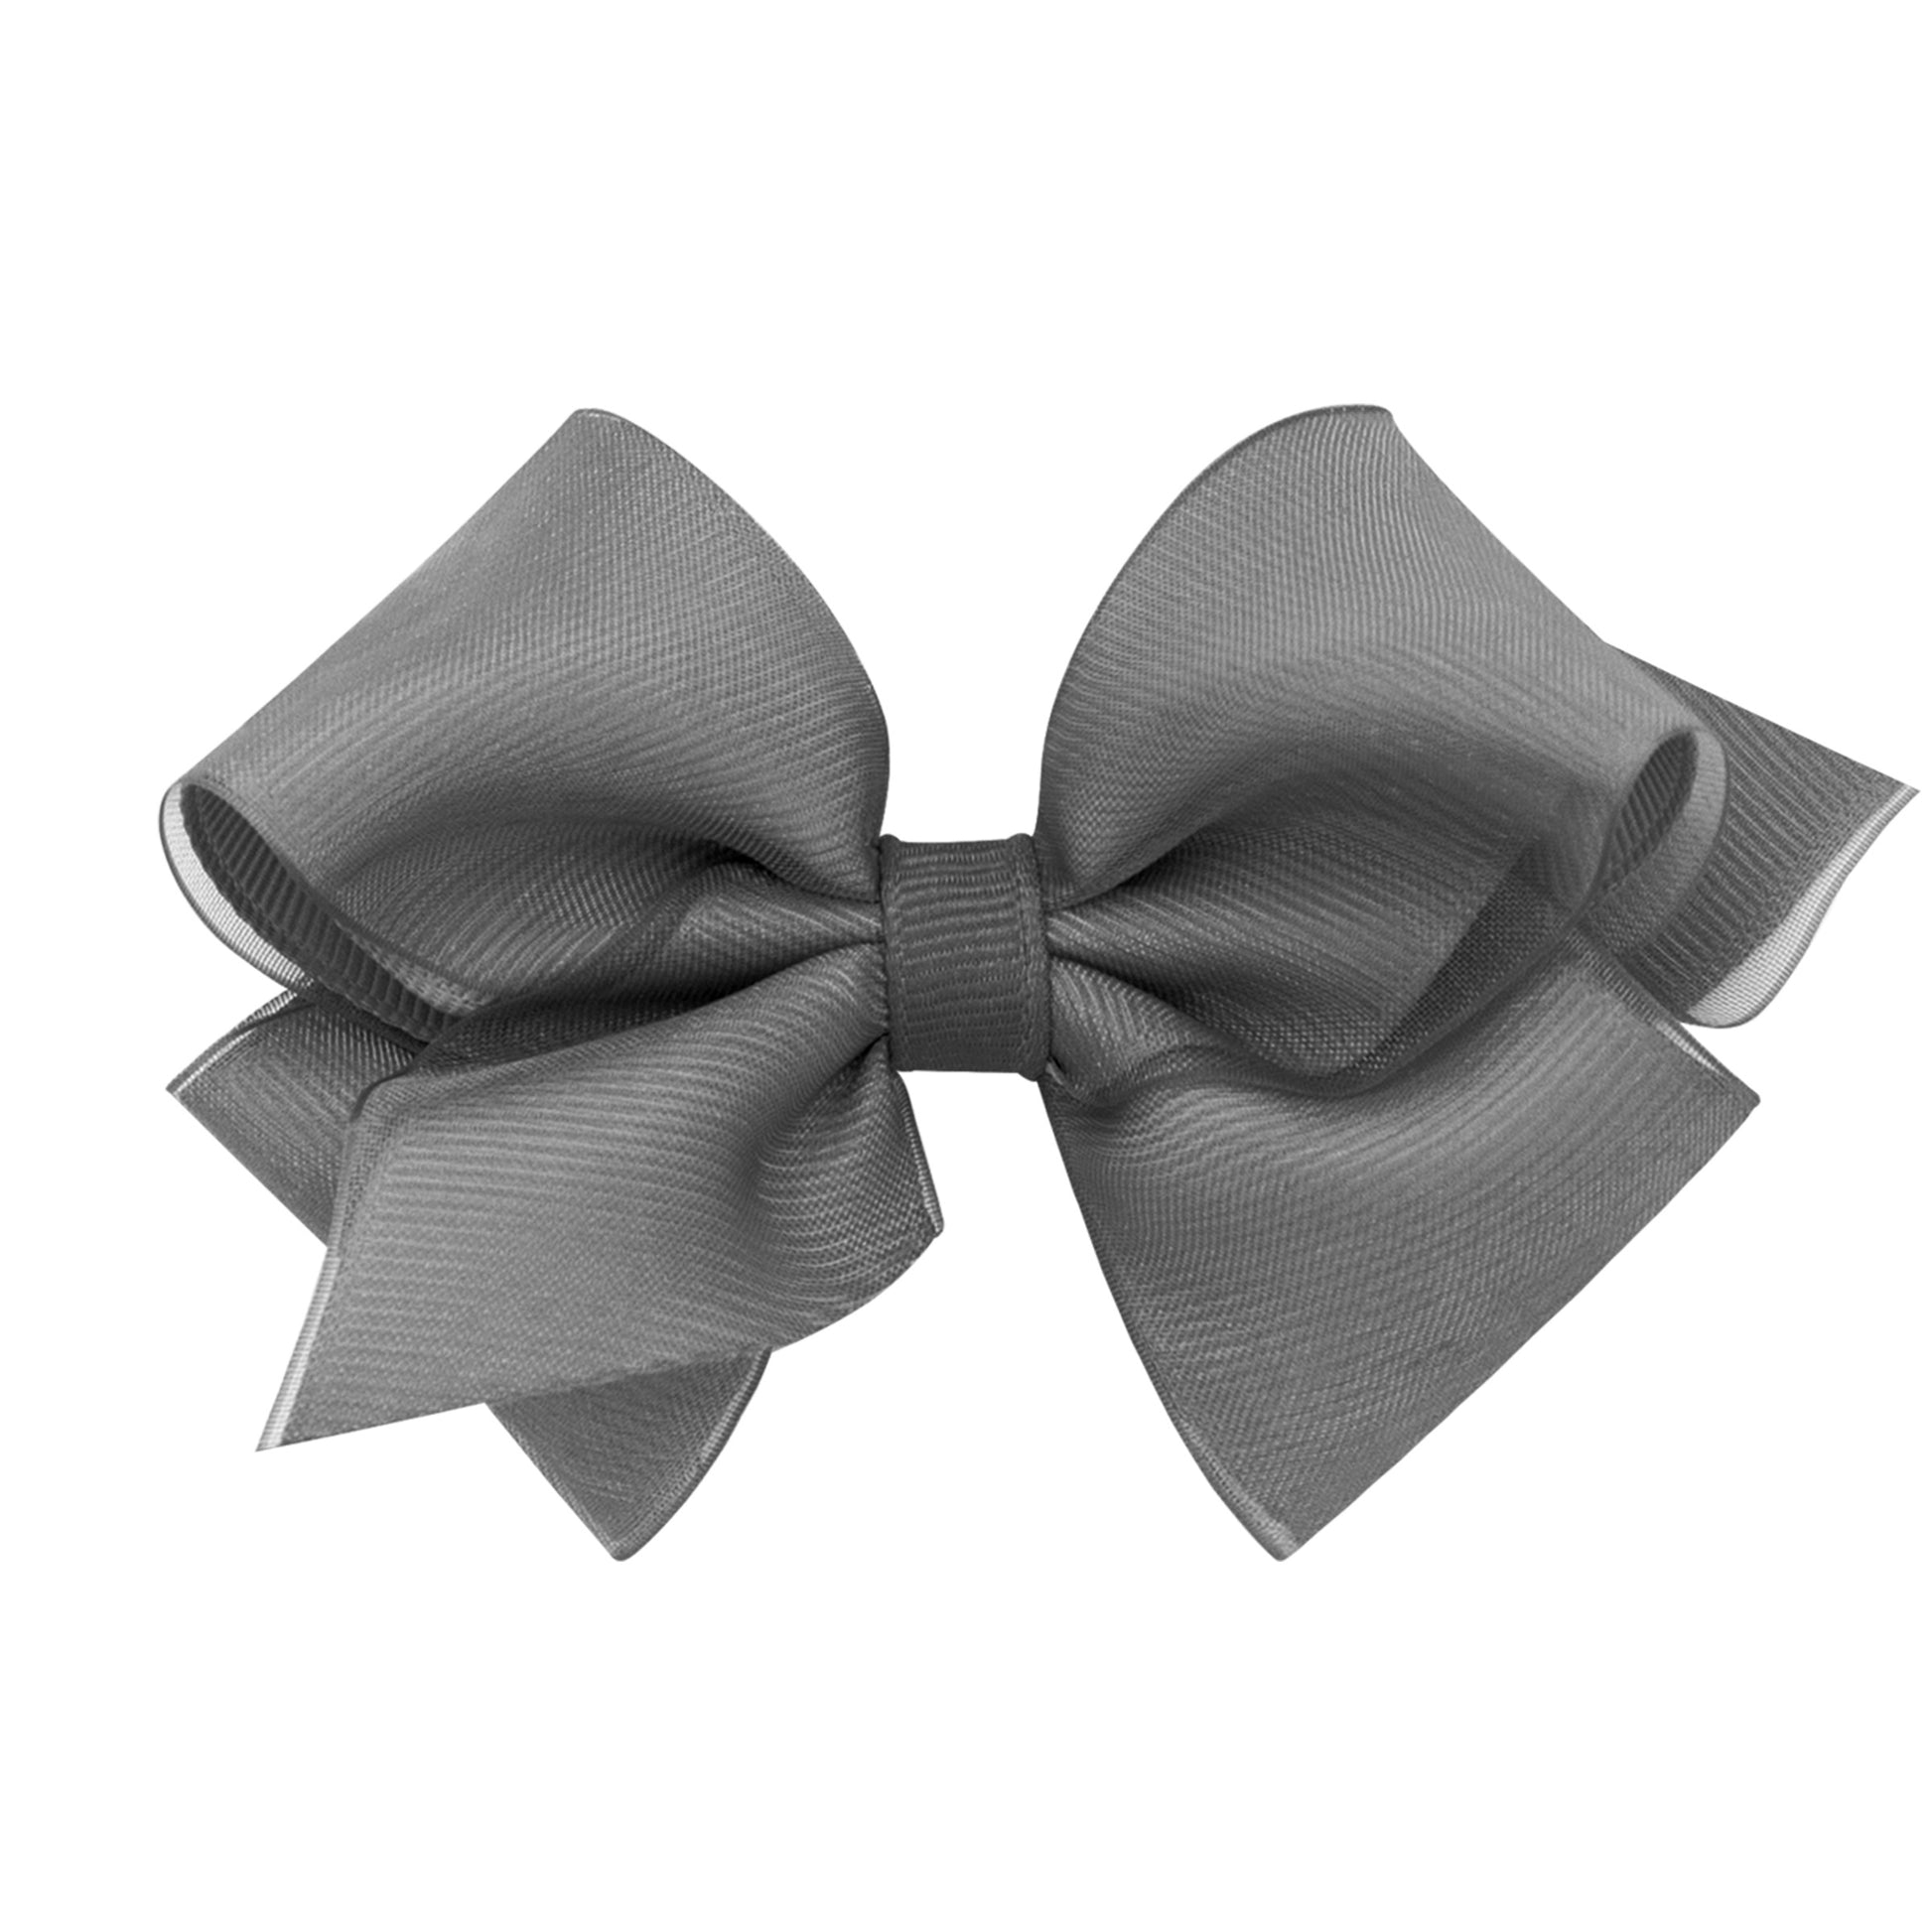 Pewter Extra Small Organza Overlay Bow Default Title - Doodlebug's Children's Boutique